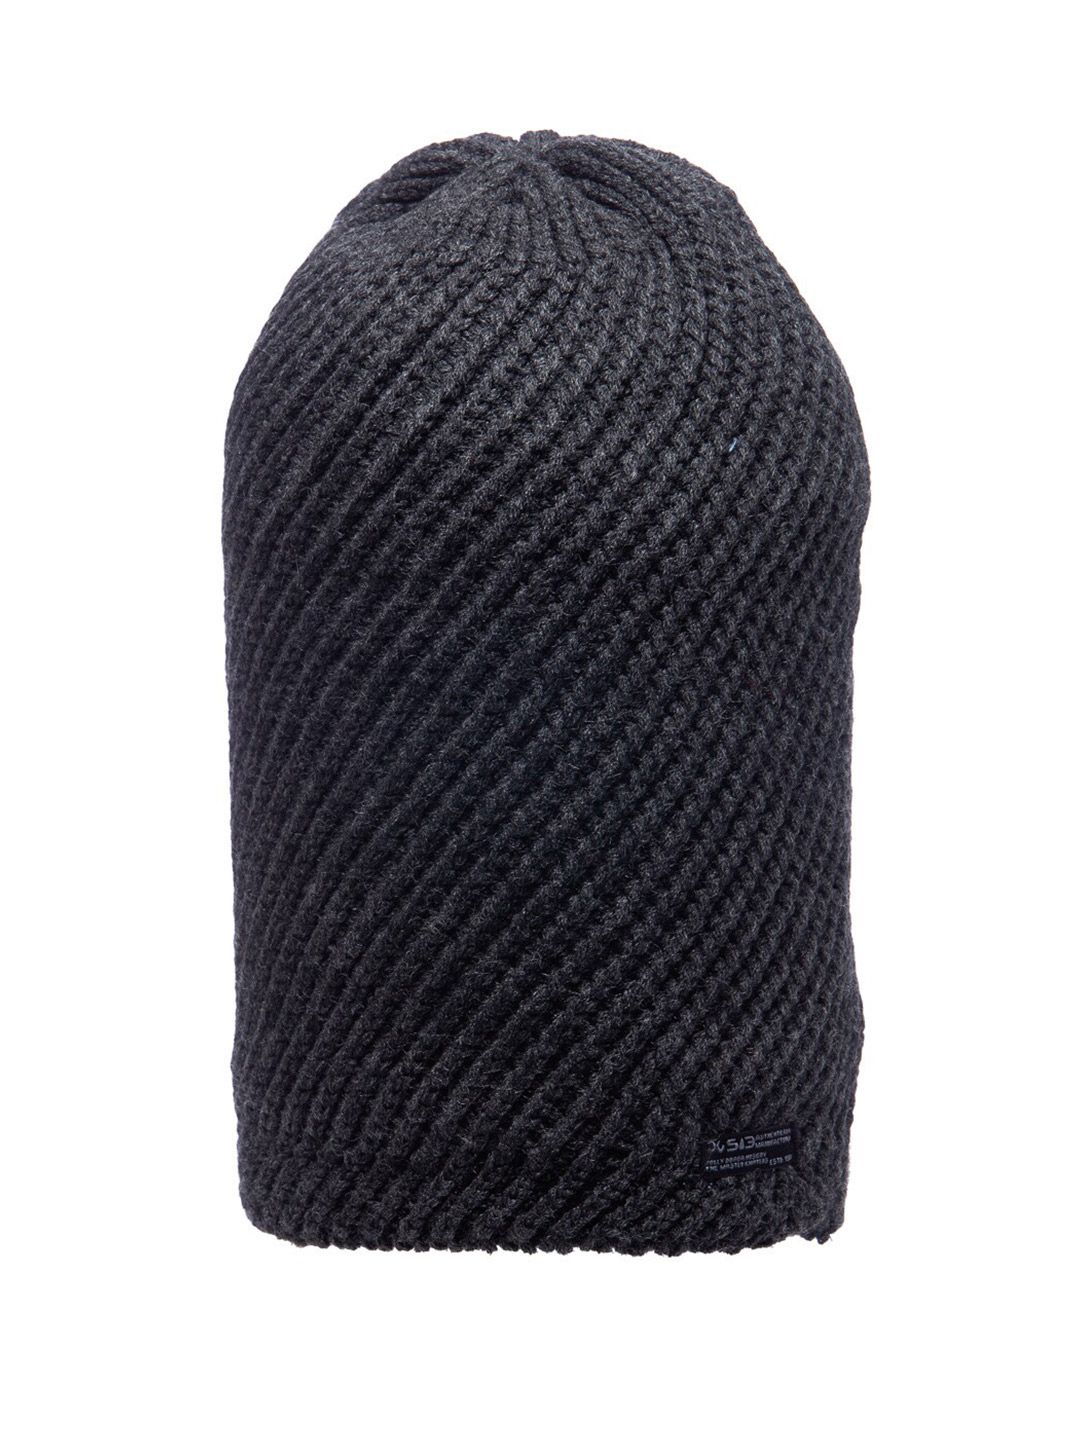 513 Women Charcoal Grey Self Design Knitted Beanie Cap Price in India